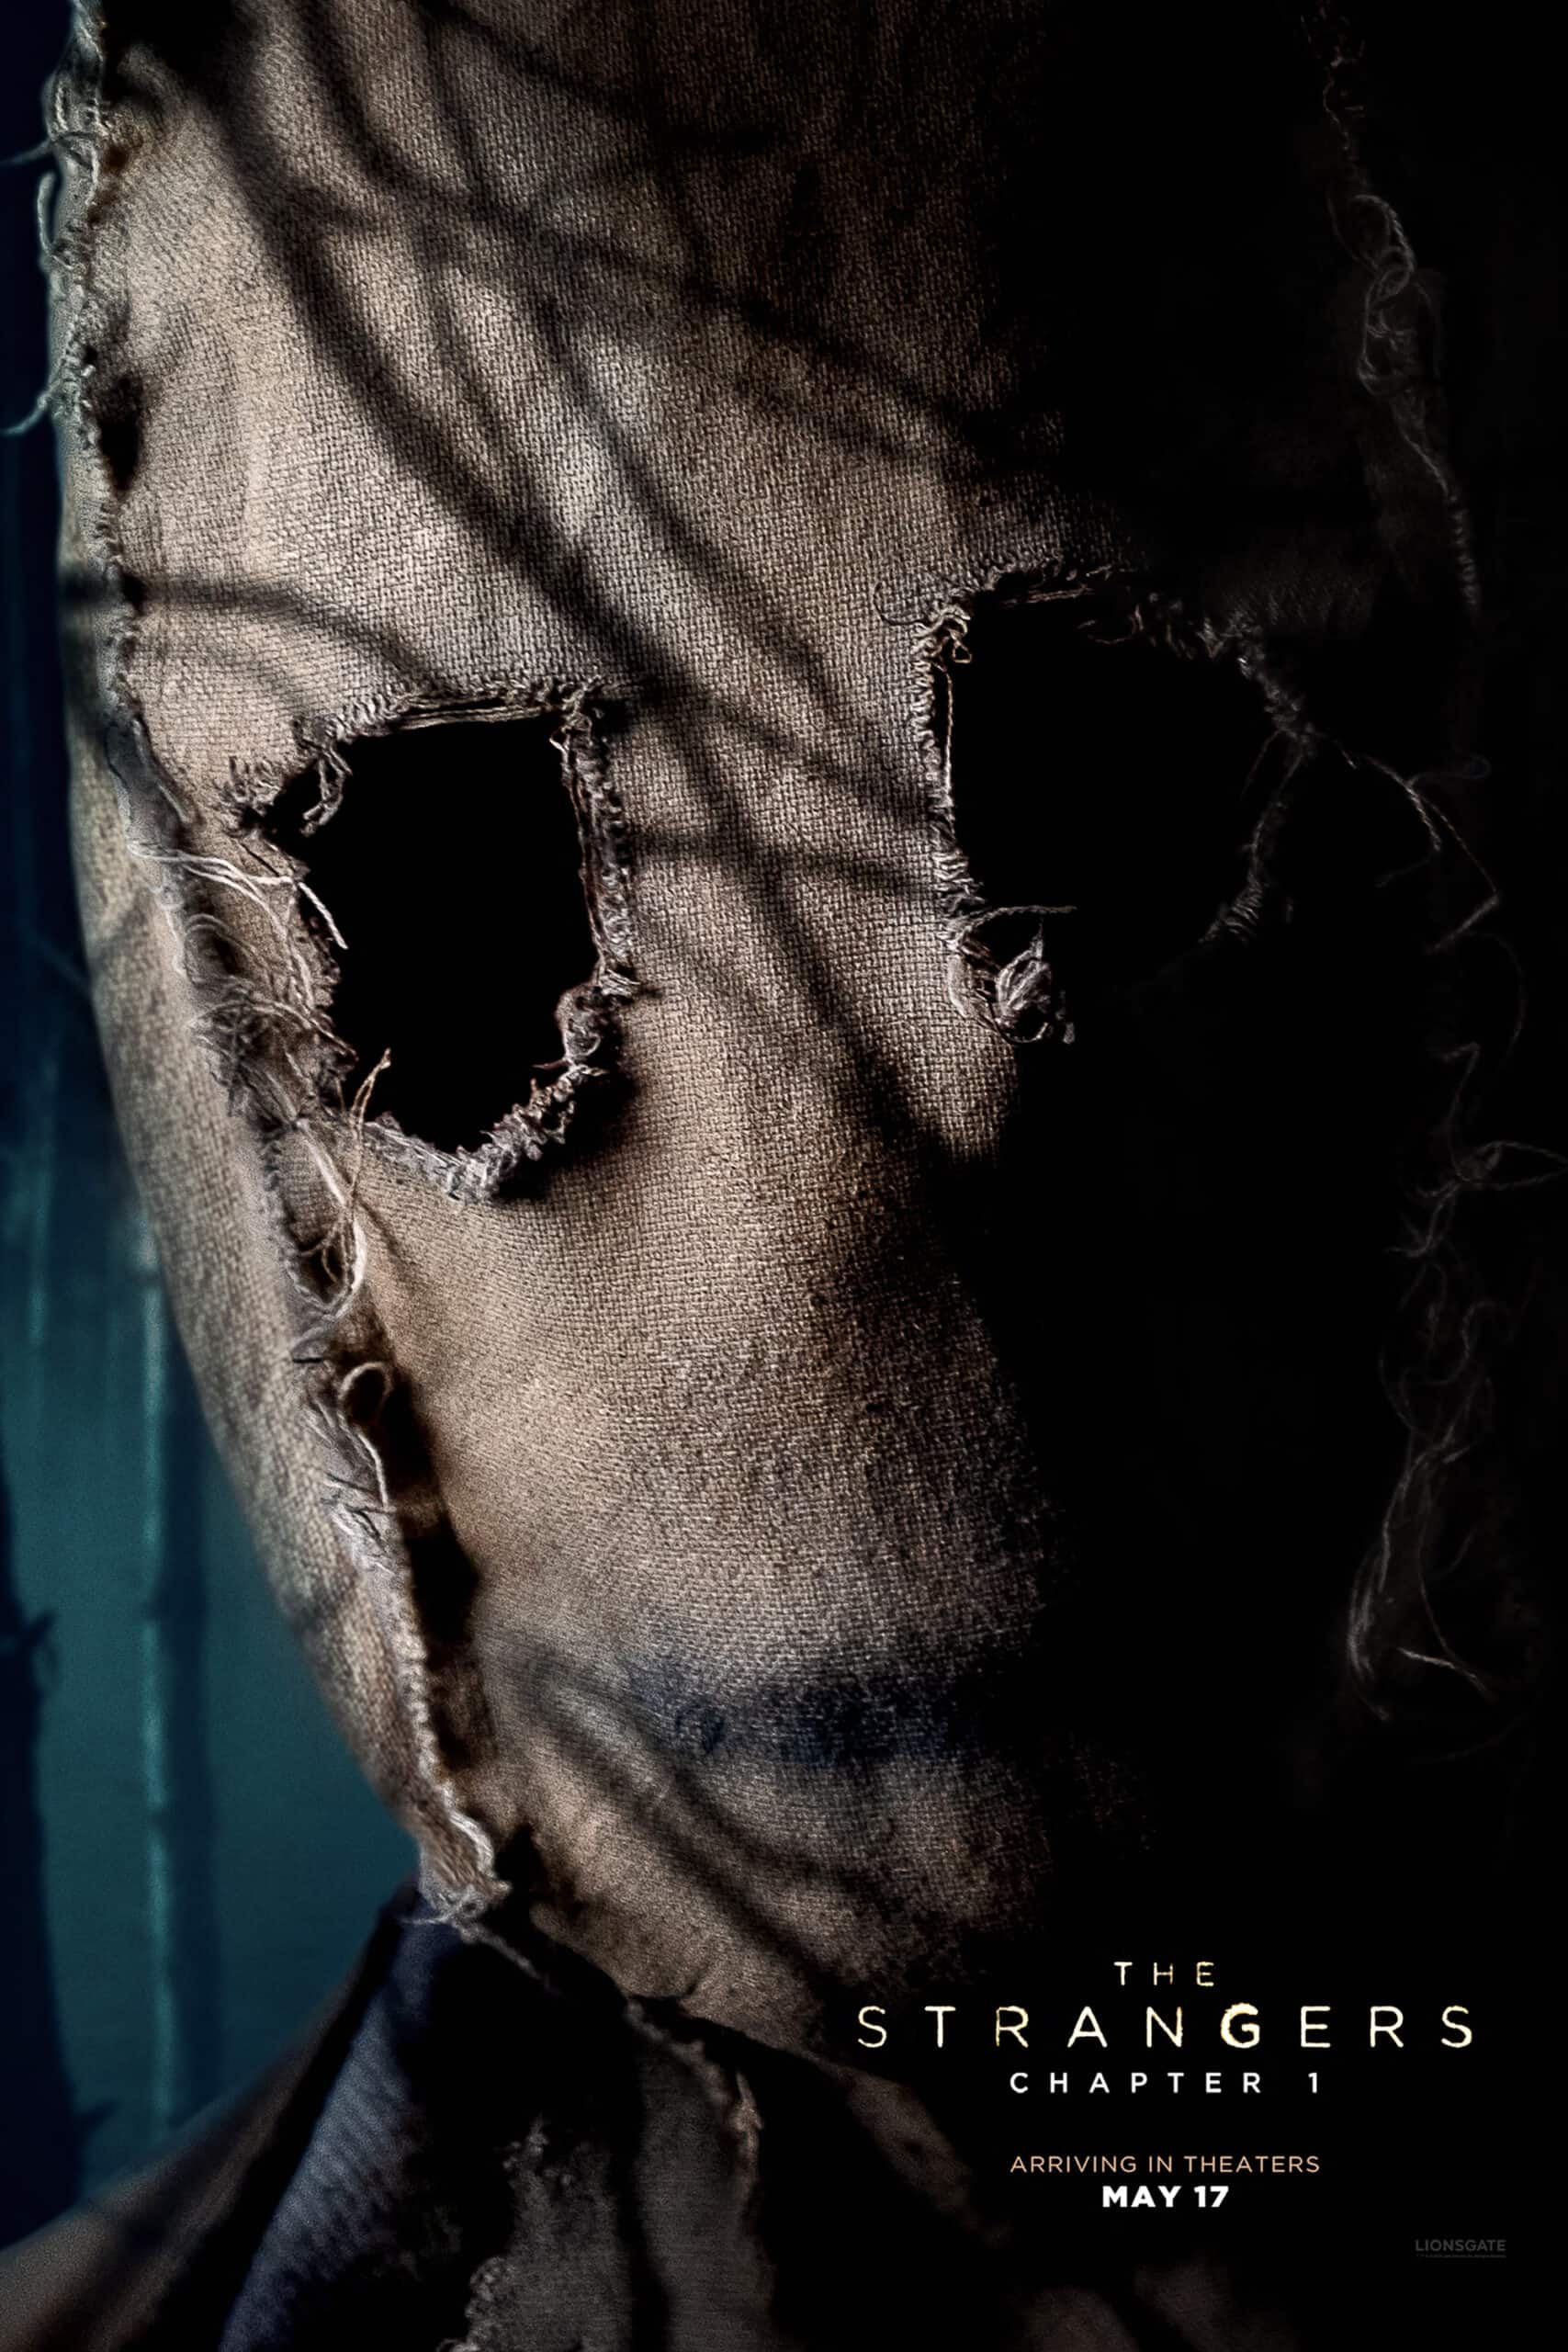 The Strangers: Chapter 1 unveils security footage promo and character posters